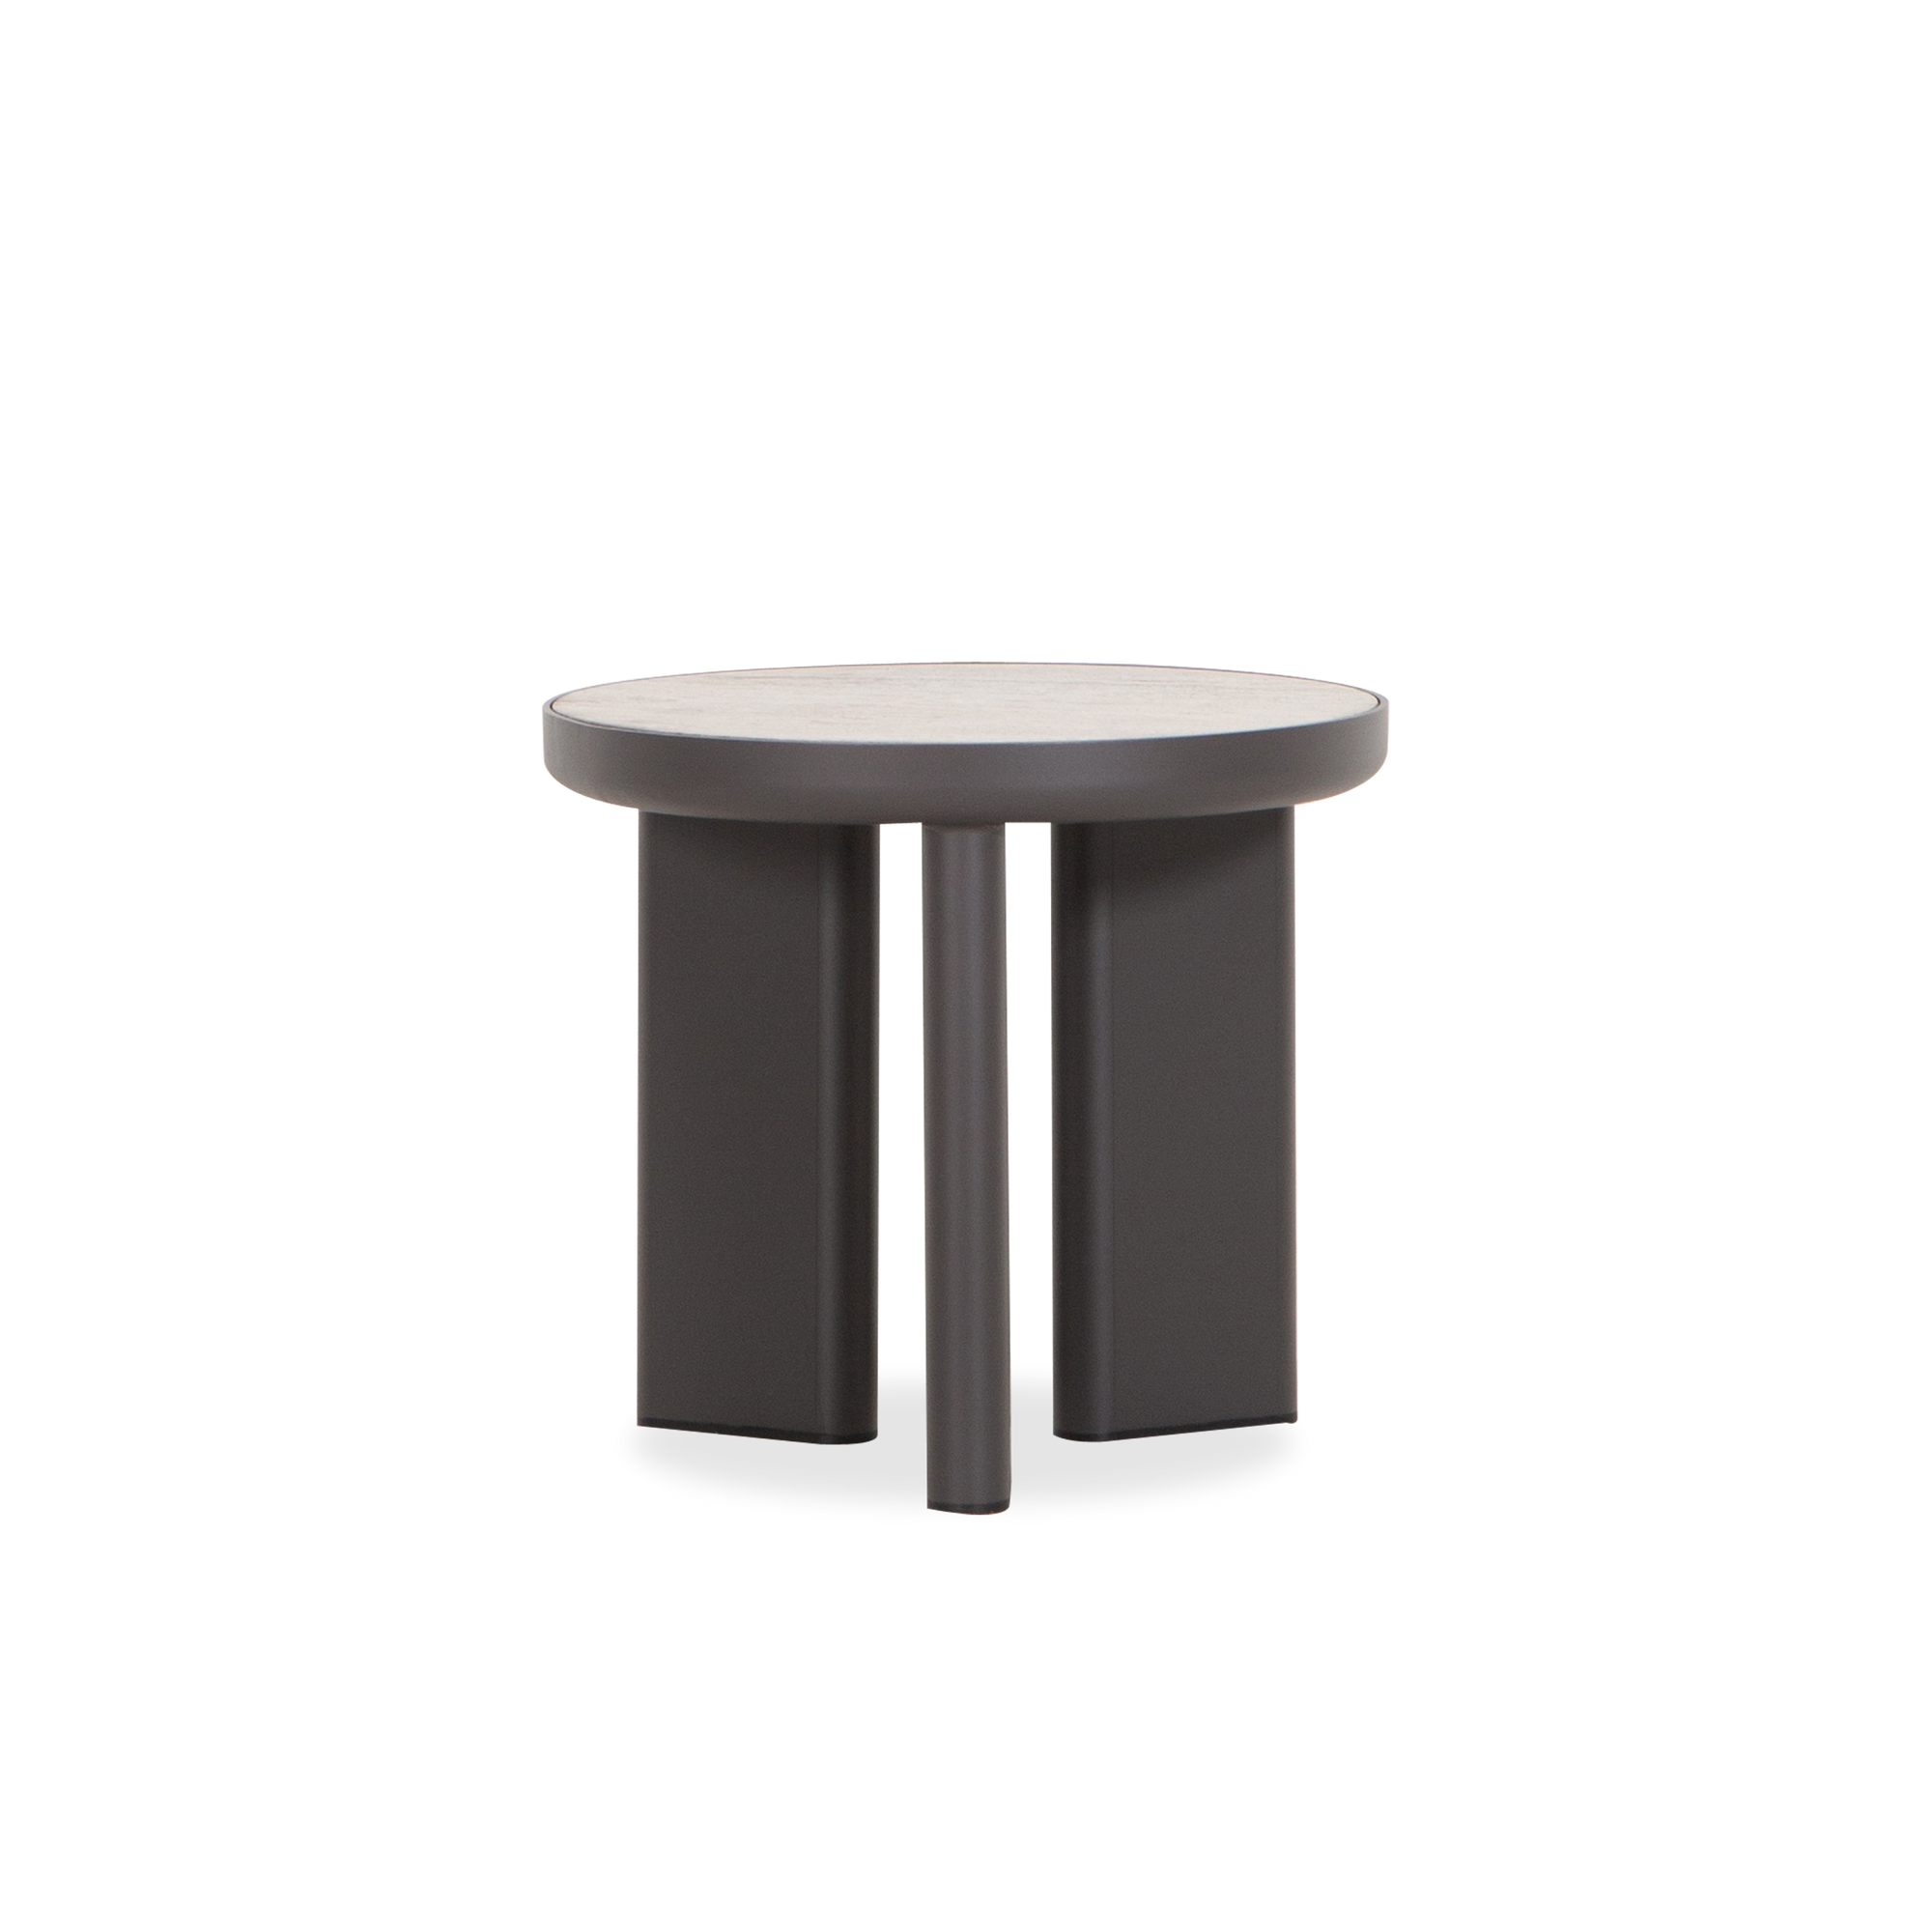 Bringing the indoors outside, the Moab Round Side Table brings the  finest materials to create sophisticated outdoor dining.